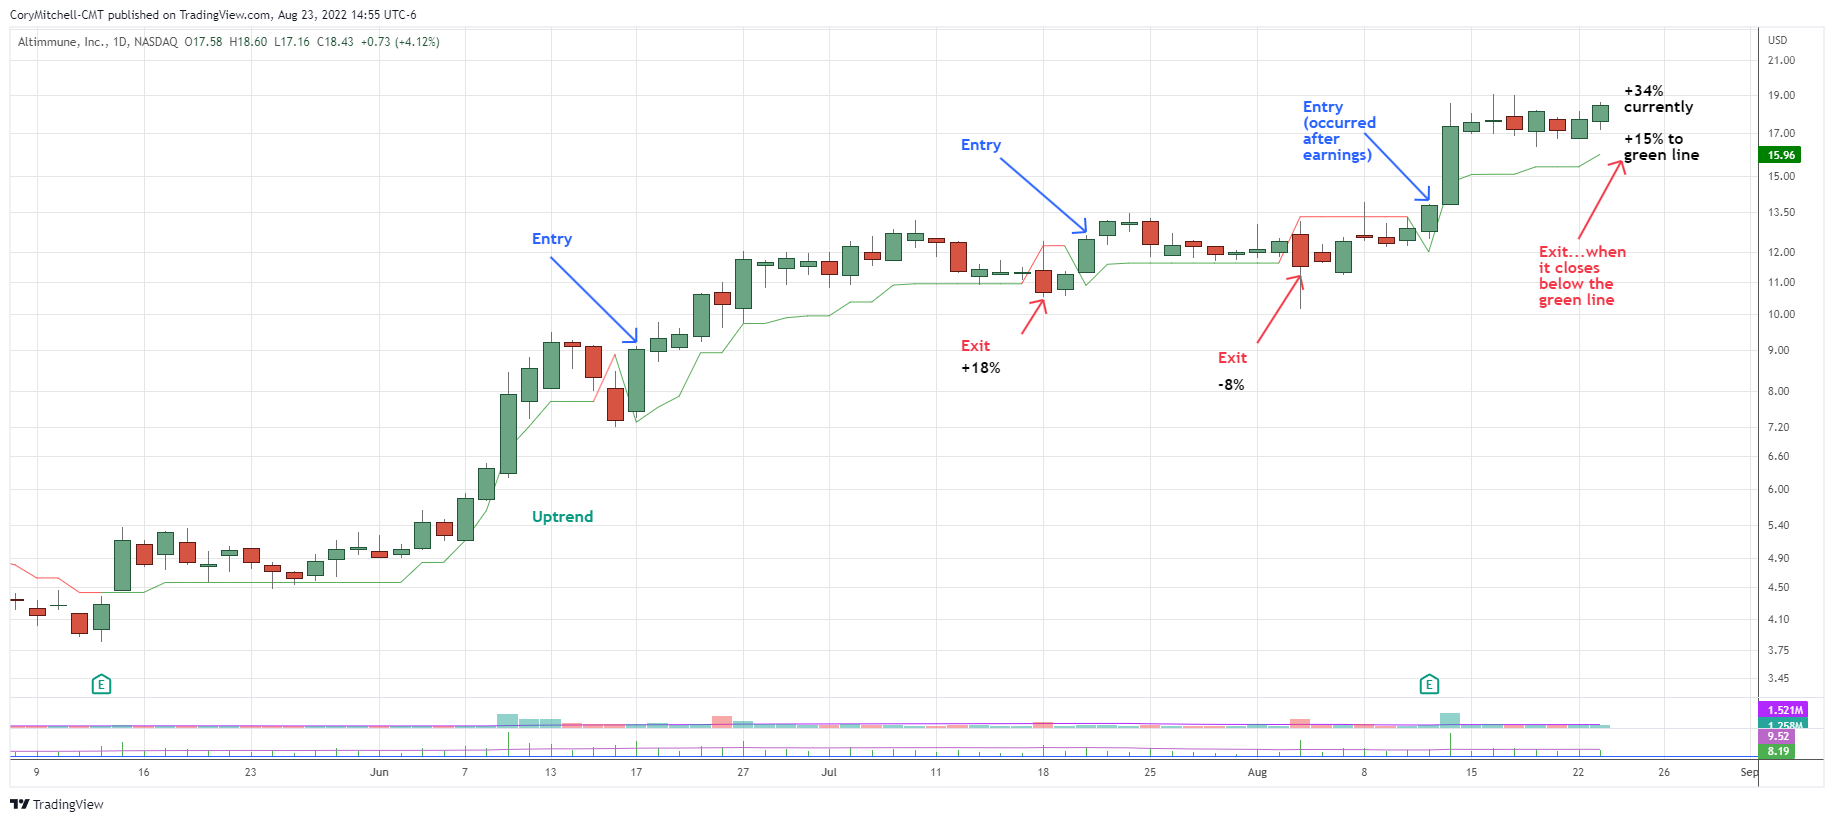 Trend strategy trade example using ATR stops indicator for entries and exits